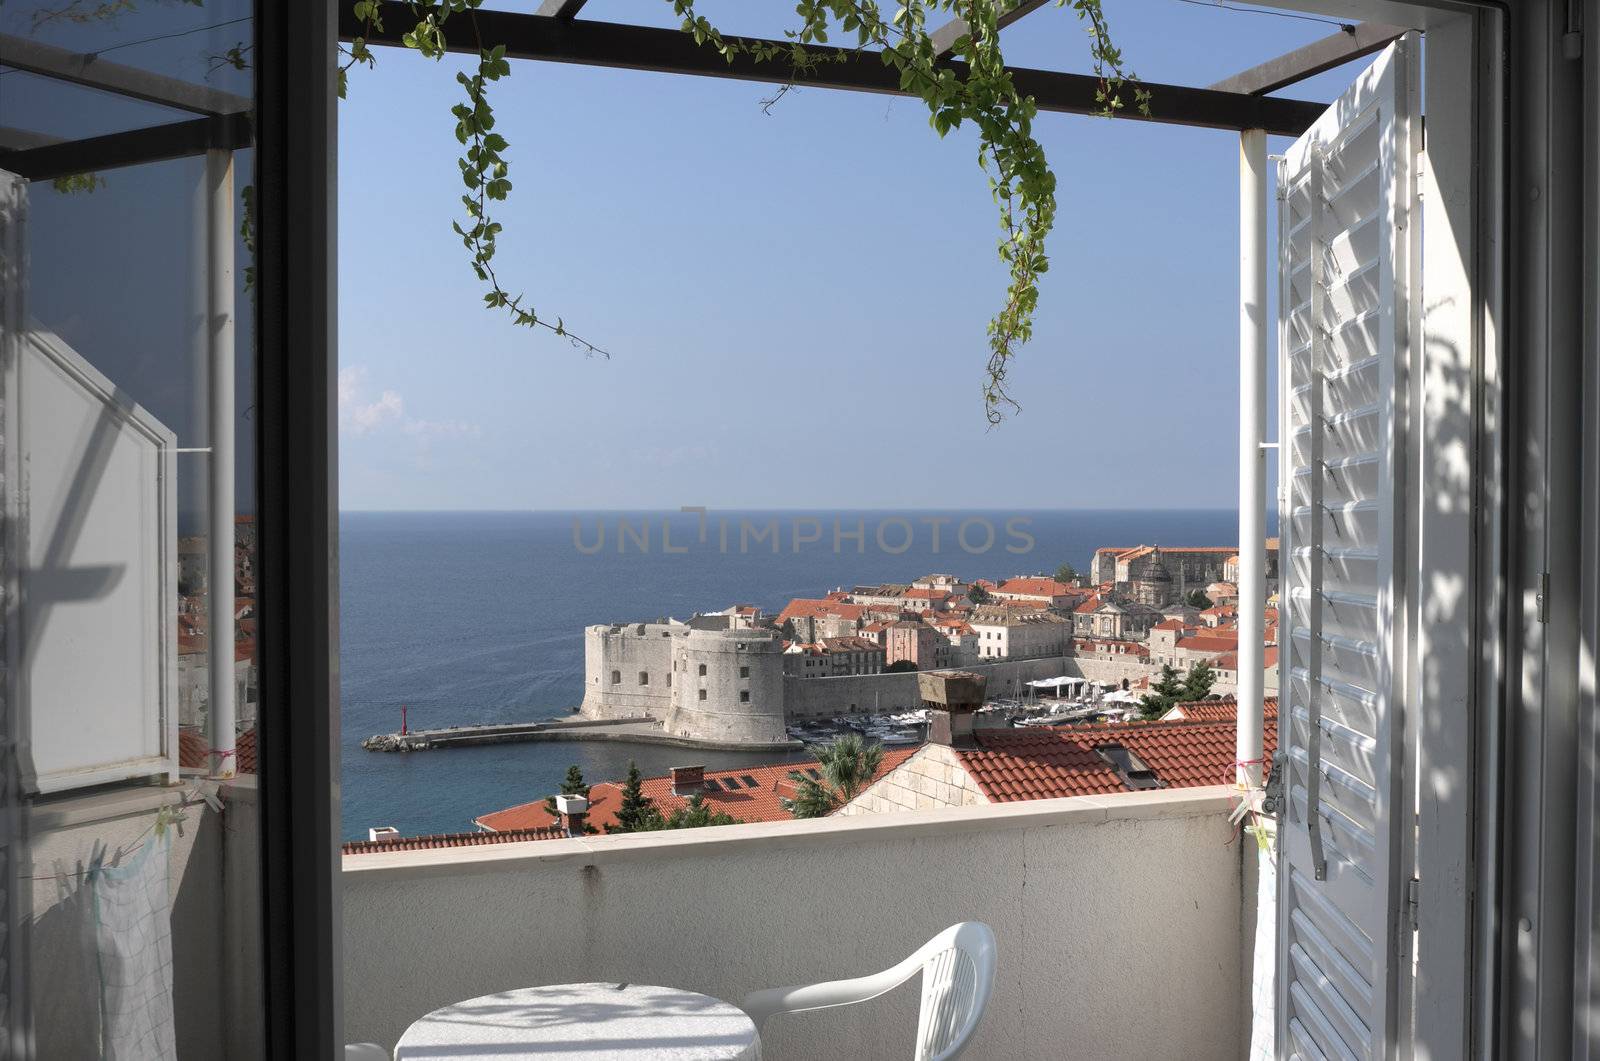 A beautiful view from my room in Dubrovnik, Croatia.